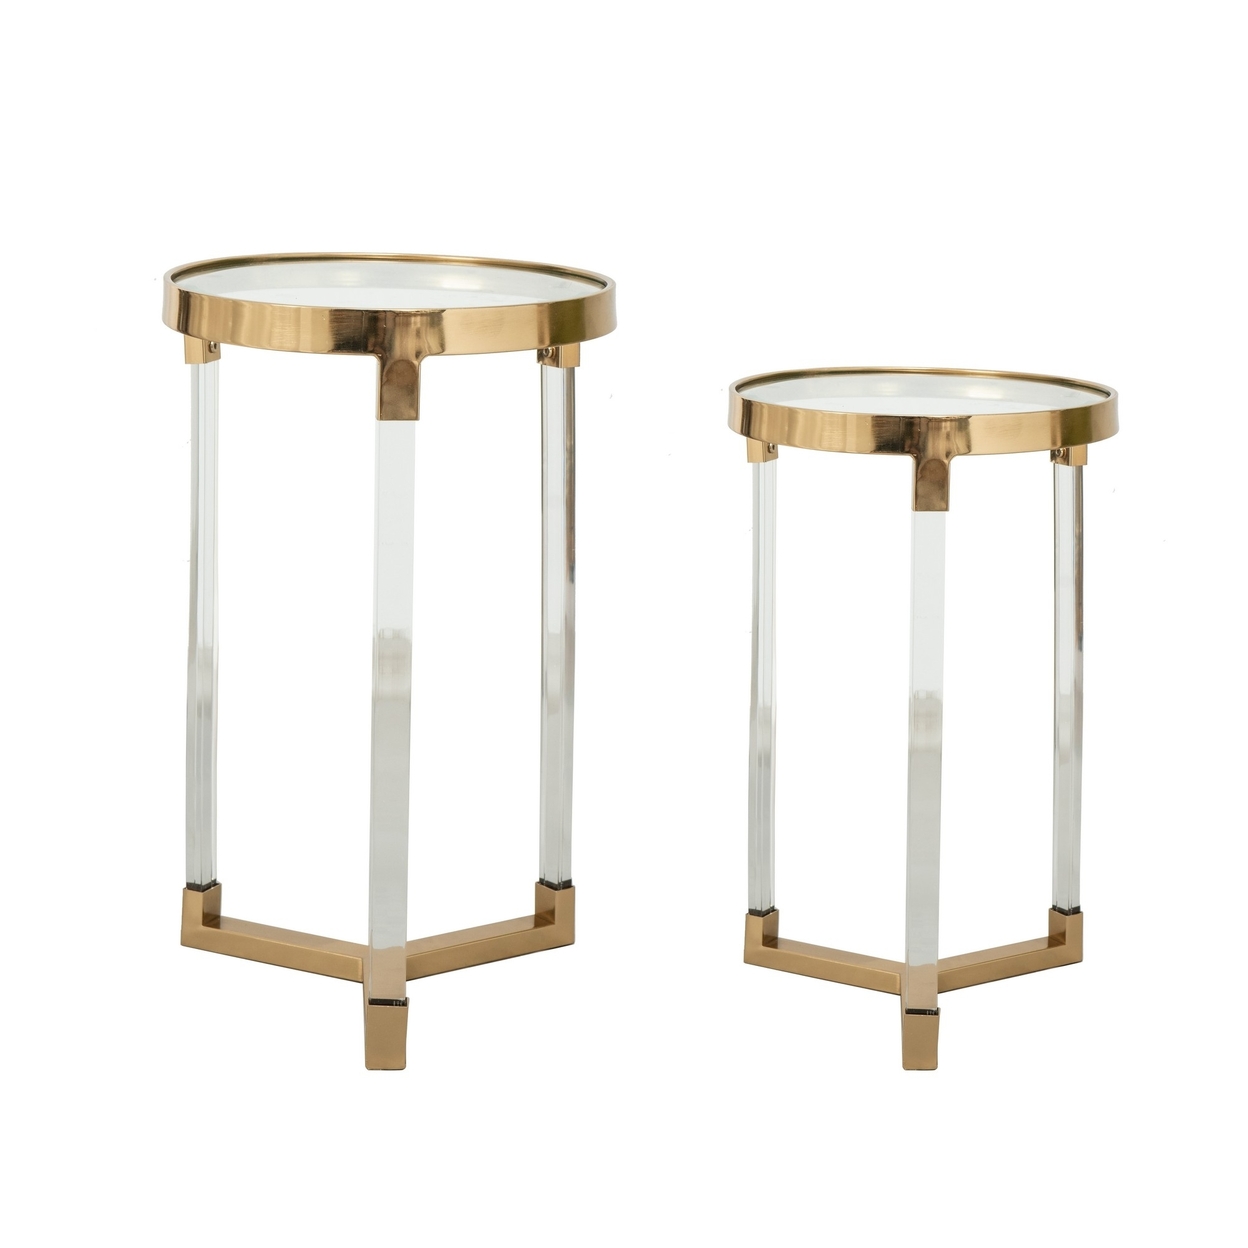 24, 21 Accent Tables, Acrylic Clear Legs, Glass Top, Set Of 2, Gold, Saltoro Sherpi